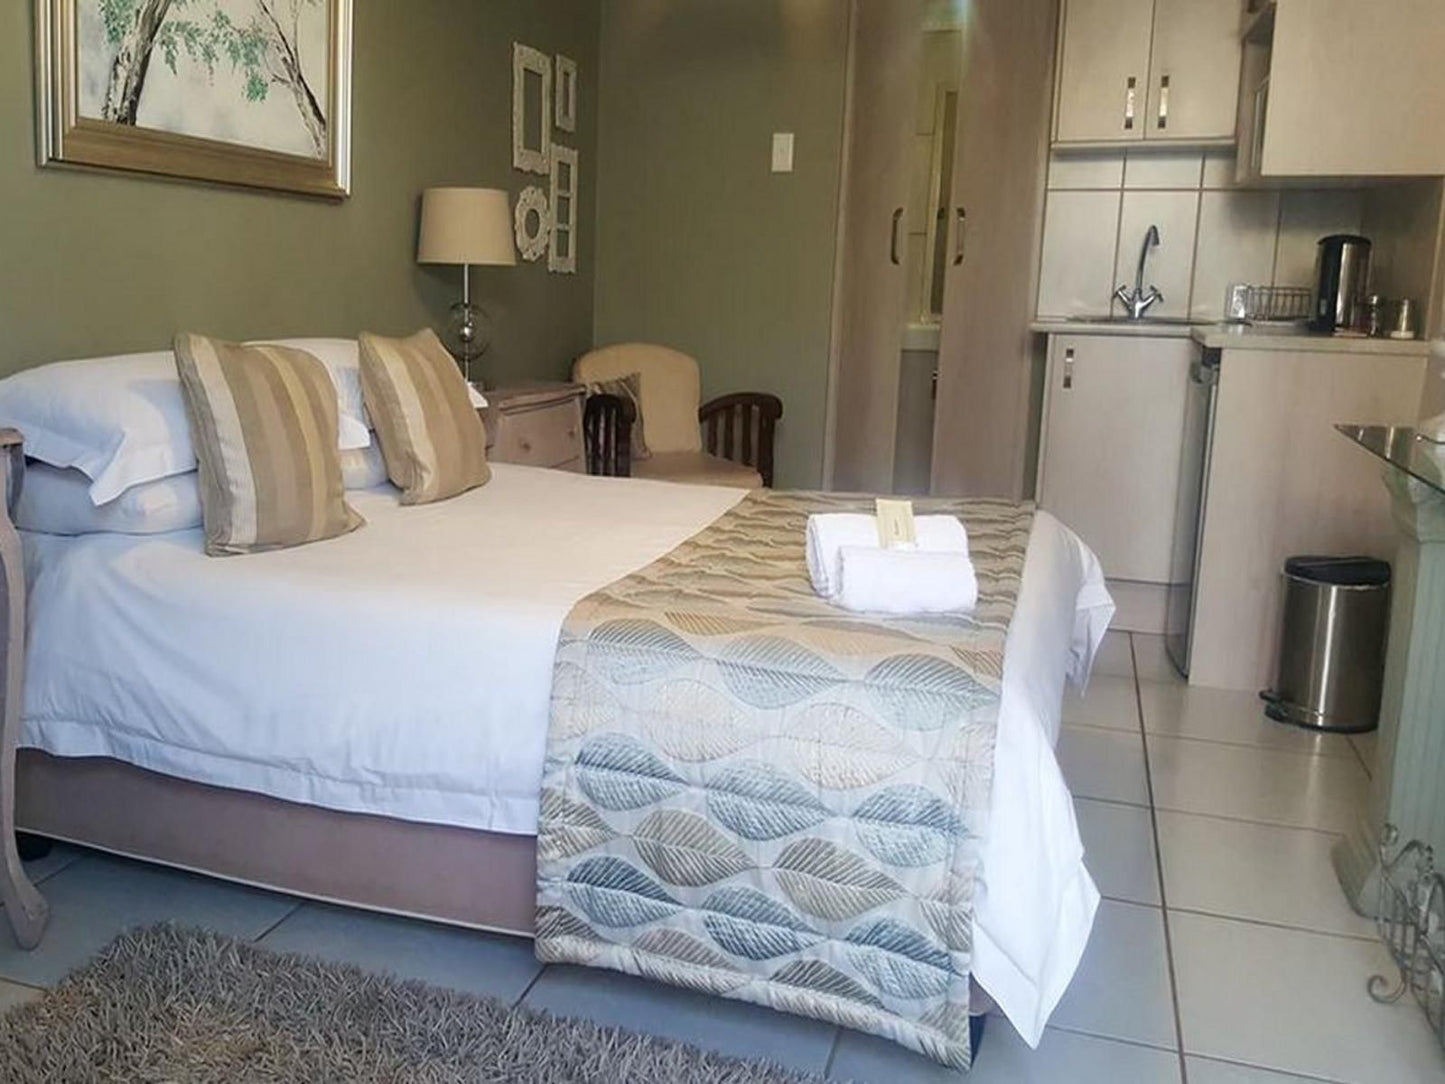 Aroma Guesthouse Upington Northern Cape South Africa Bedroom